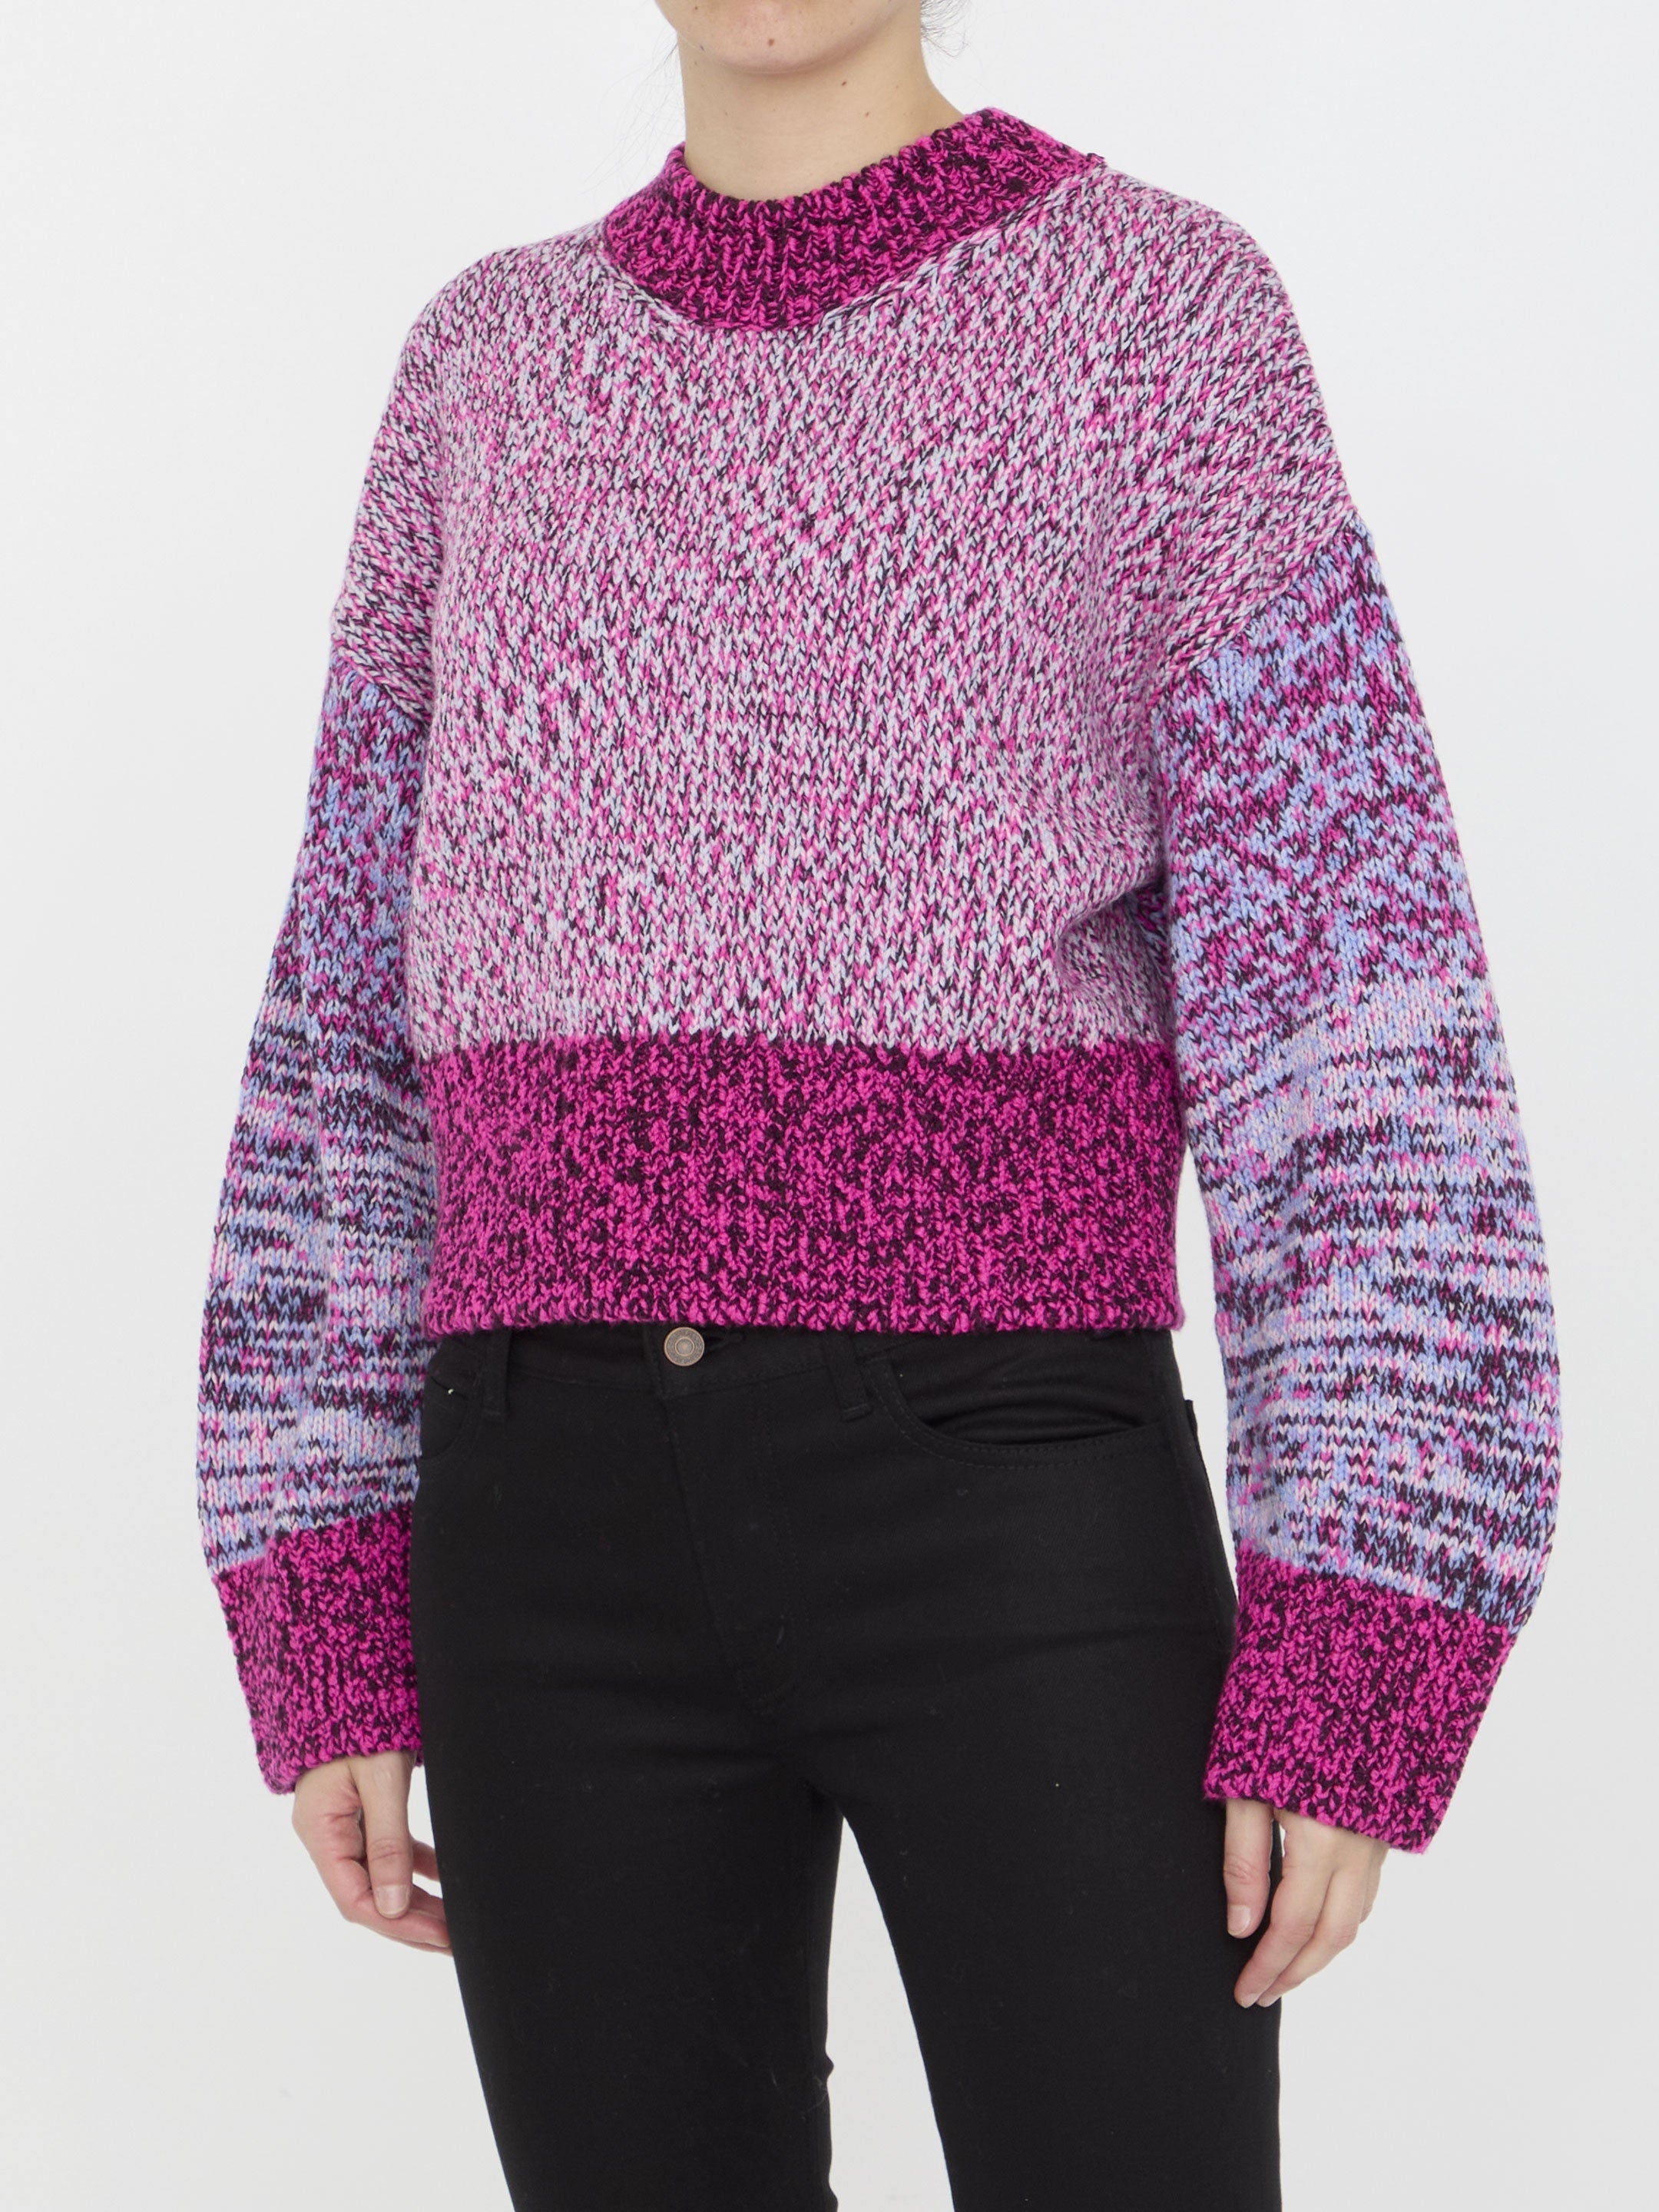 LOEWE-OUTLET-SALE-Wool-sweater-Strick-ARCHIVE-COLLECTION-2.jpg